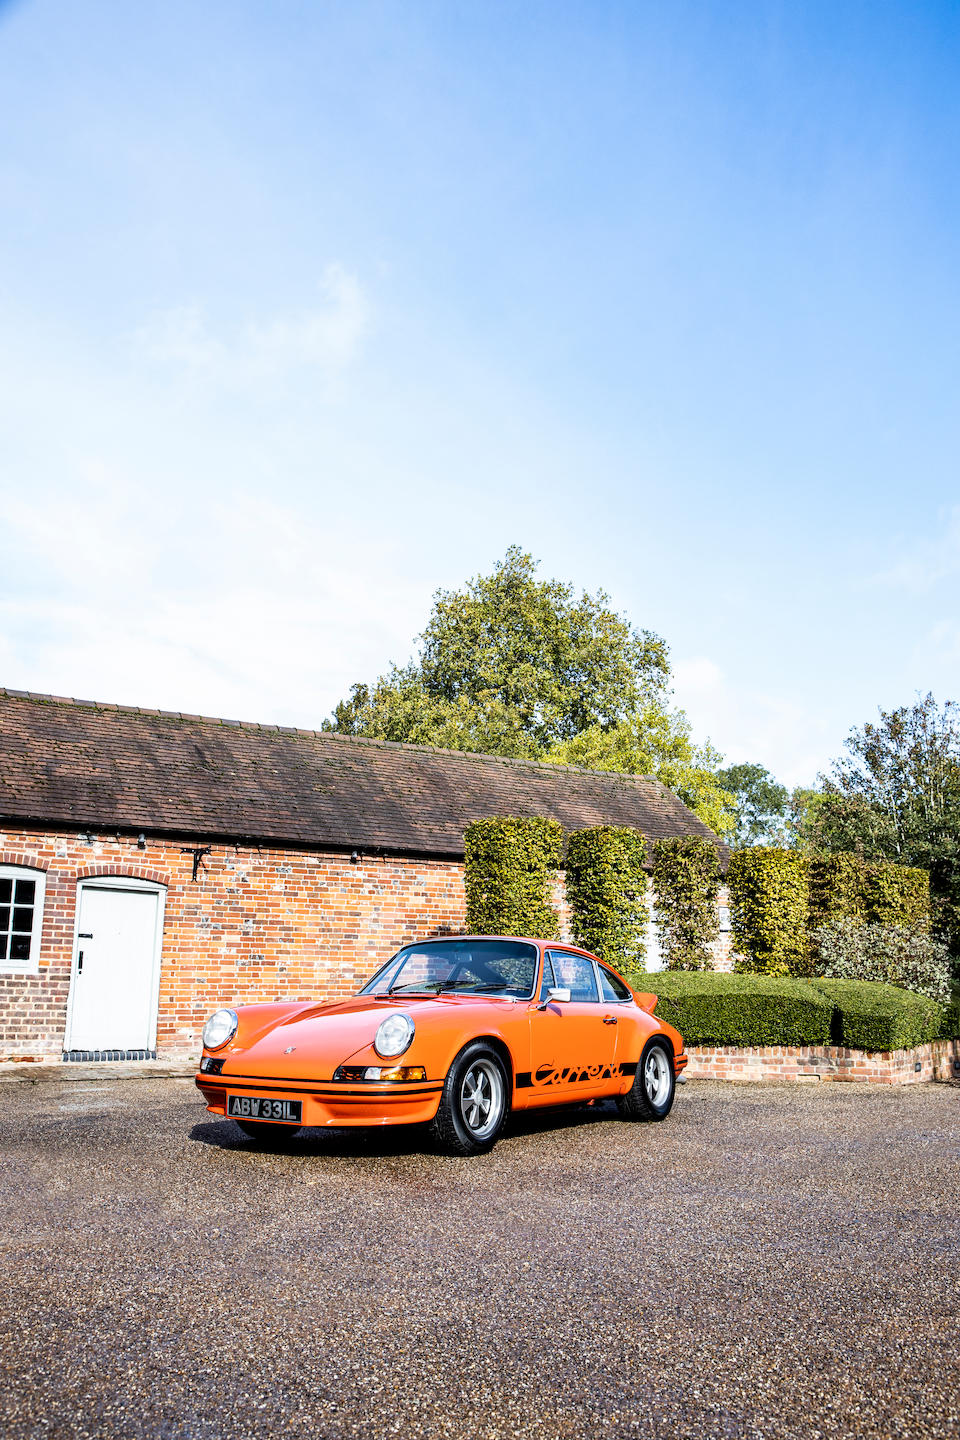 Offered from the collection of Jay Kay. One of only 200 examples built,1973 Porsche 911 Carrera RS 2.7-Litre 'Lightweight' Coup&#233;  Chassis no. 9113601097